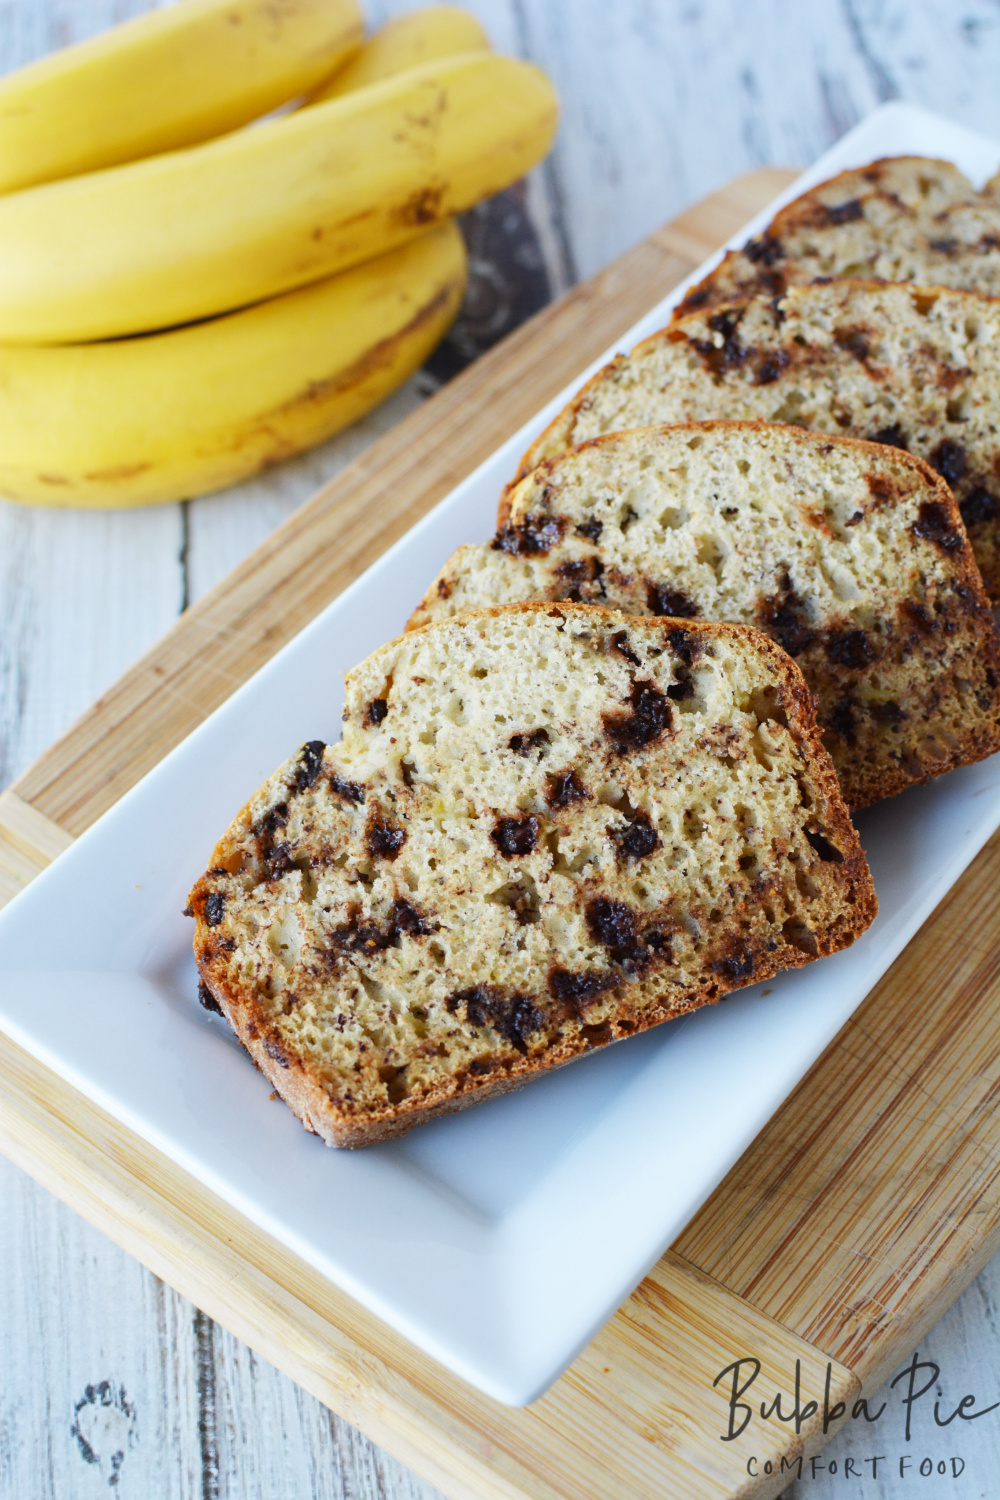 chocolate chip banana bread recipe tastes great with some melted butter on it